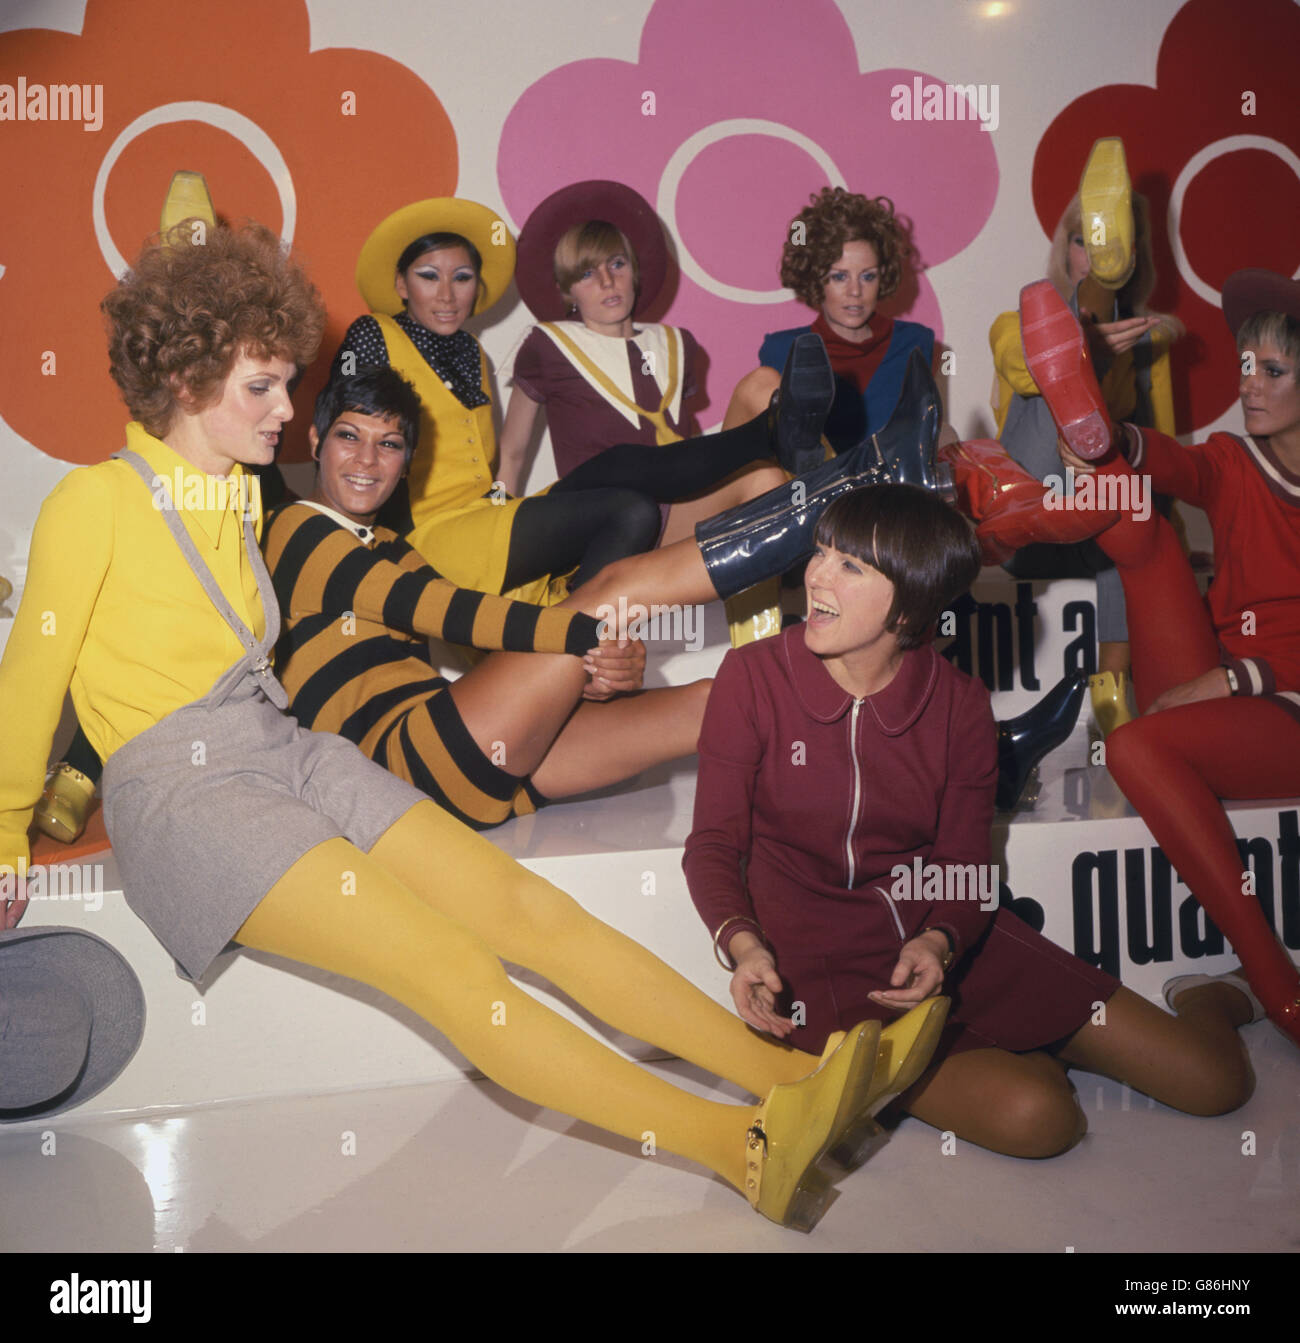 Fashion - Mary Quant - 1967 - London. Models showing off their footwear ...